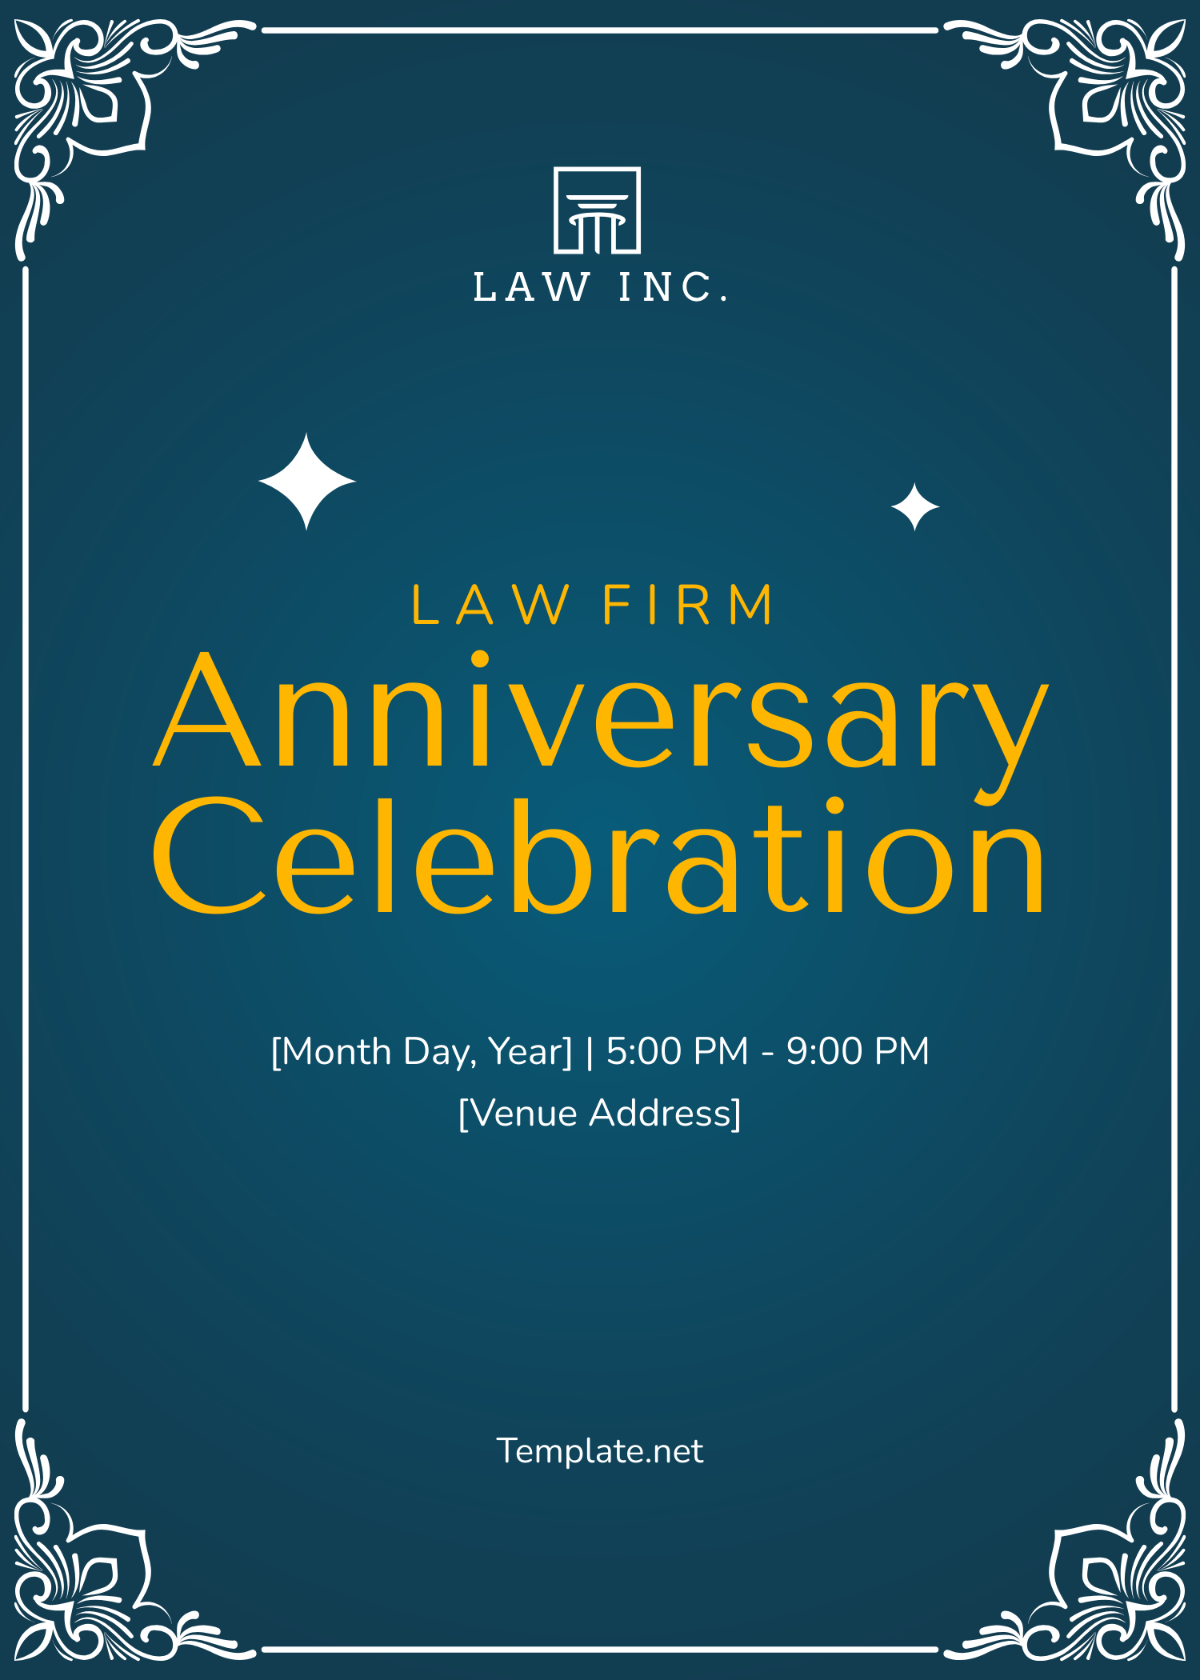 Law Firm Party Invitation Template